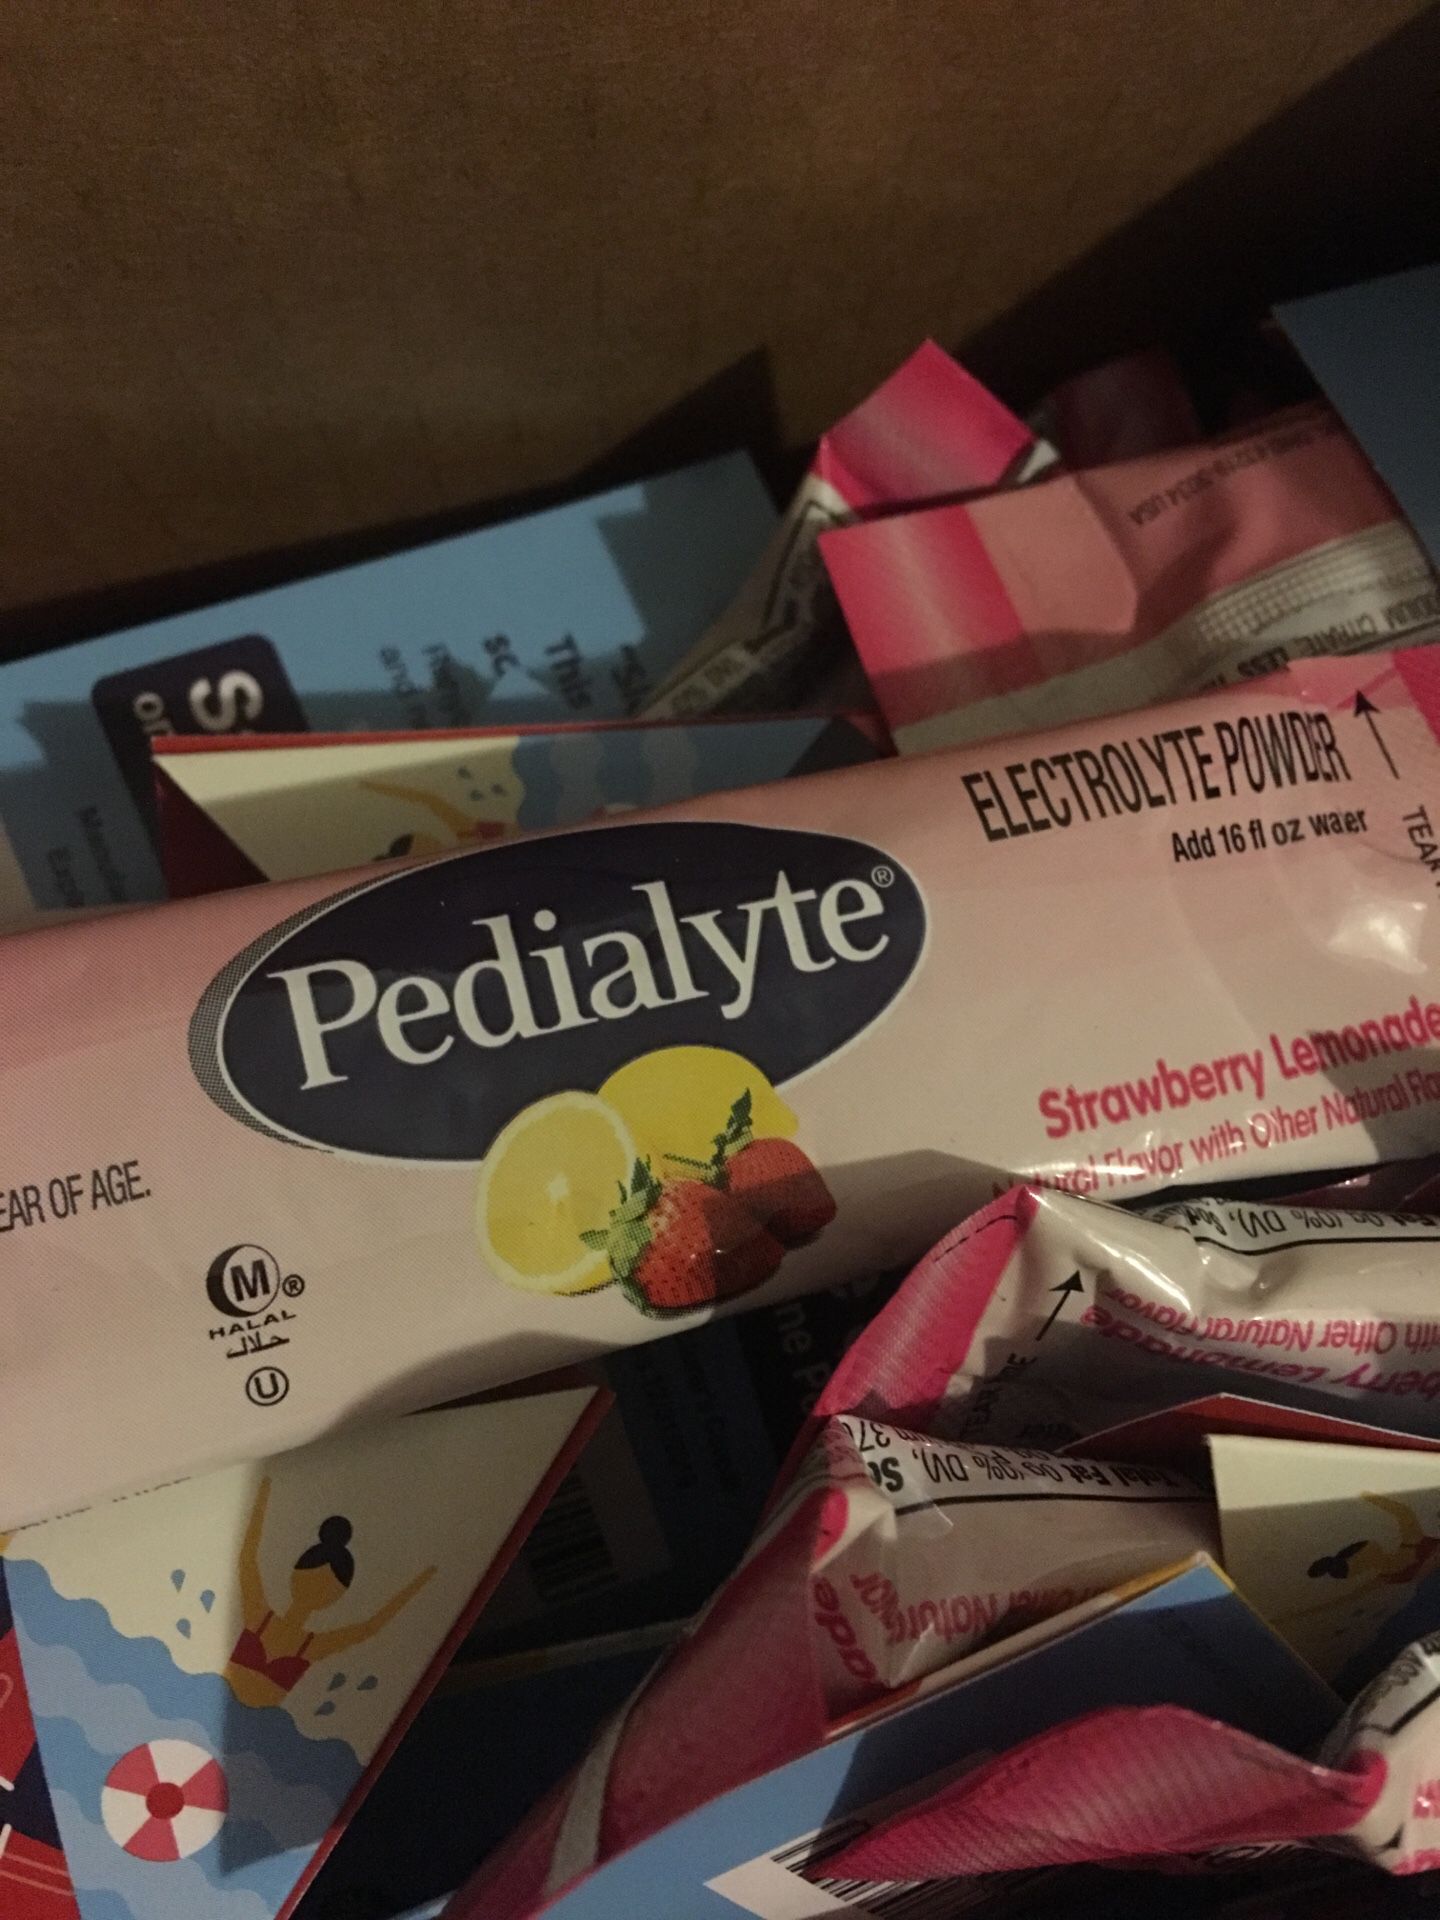 Pedialyte electrolyte powder 16oz packets by the case